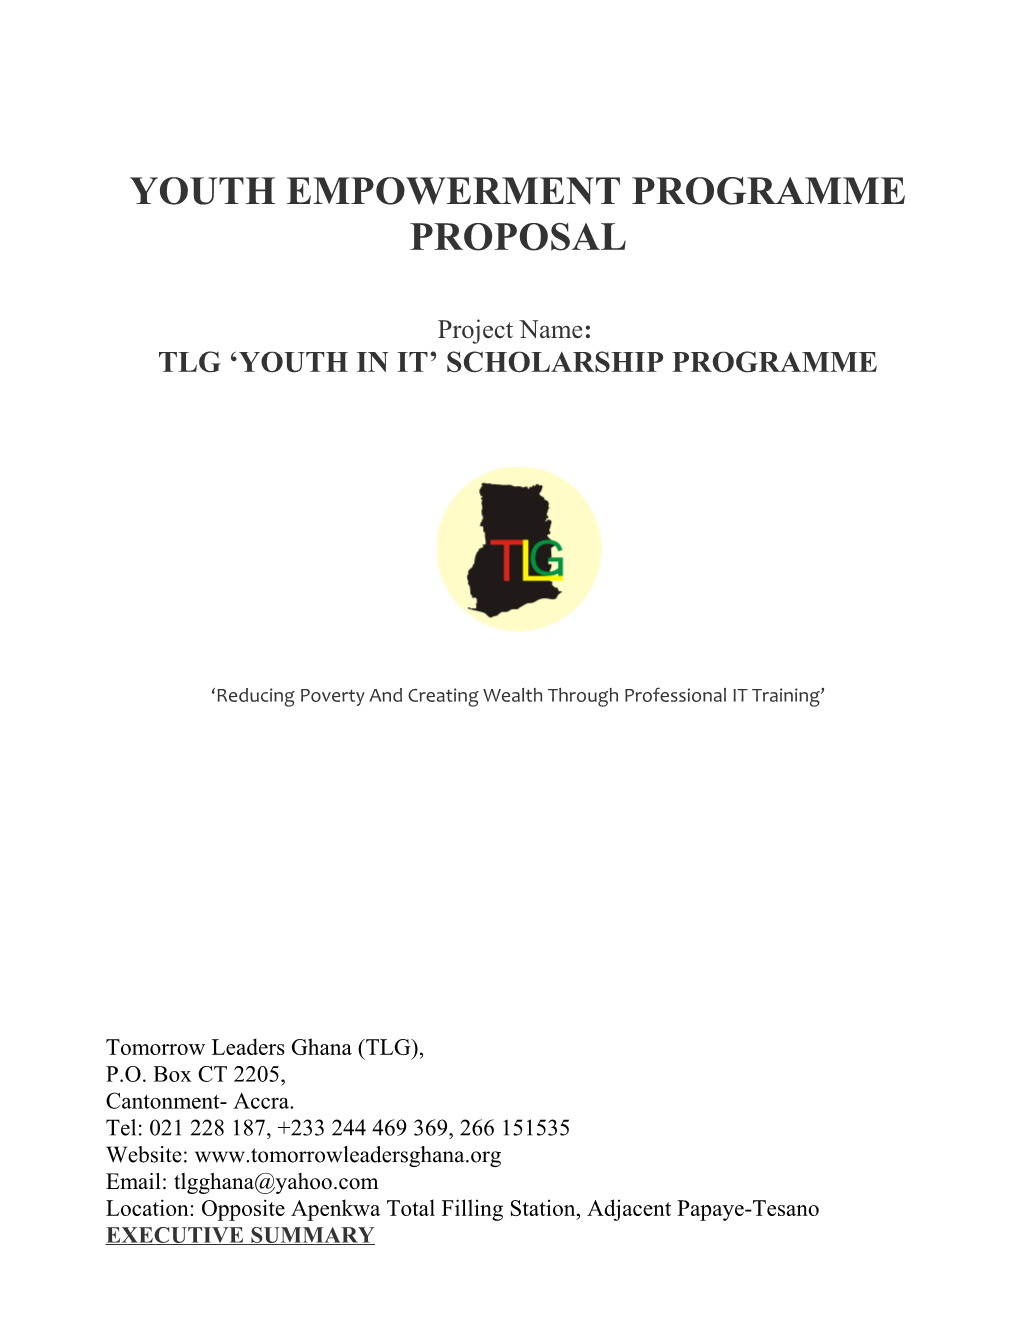 TLG Secures 400,000 USD Scholarship for IT Passionate Youth